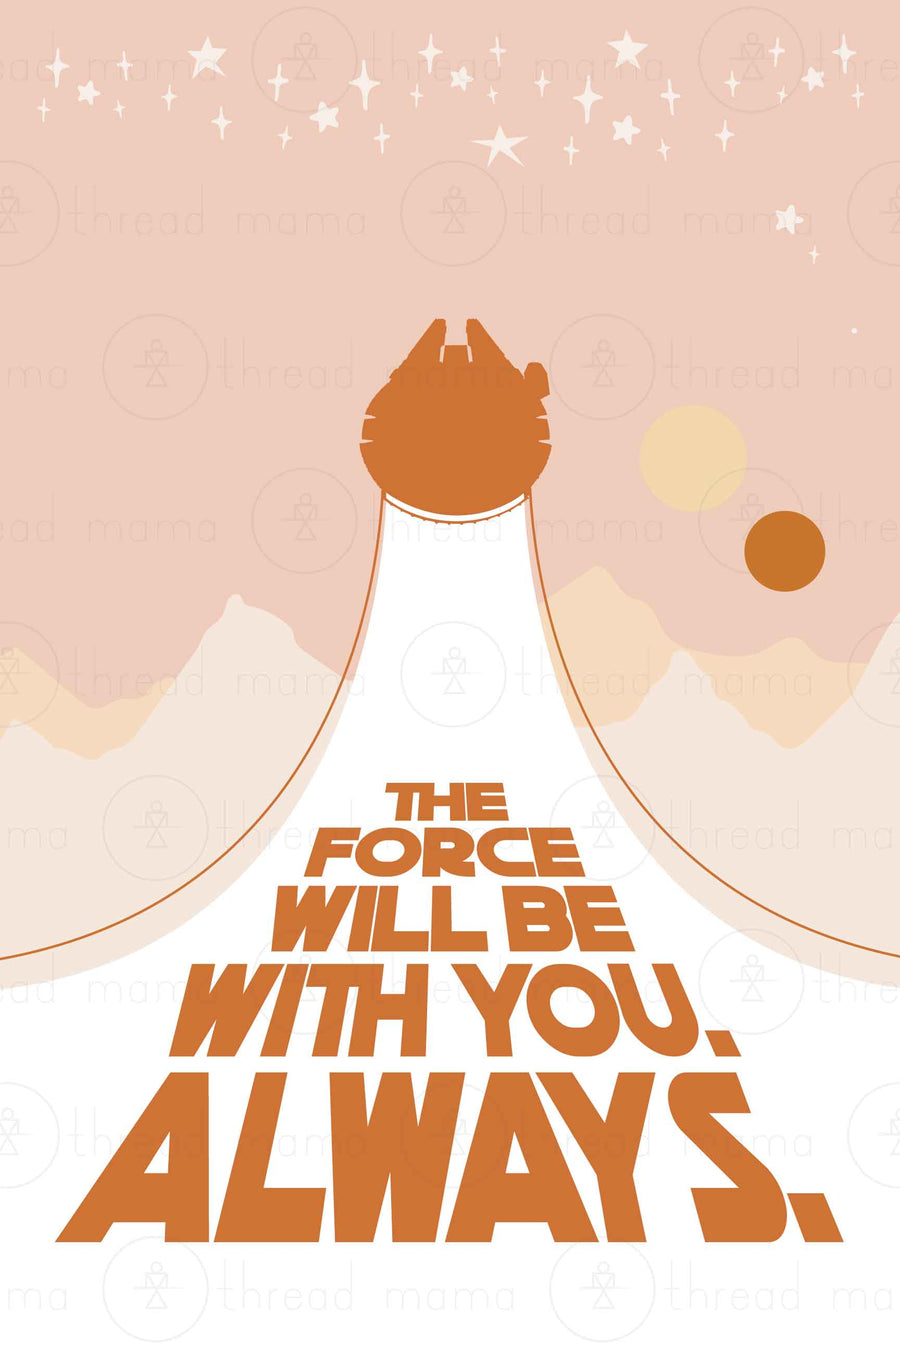 The Force Always. Collection (Printable Poster)